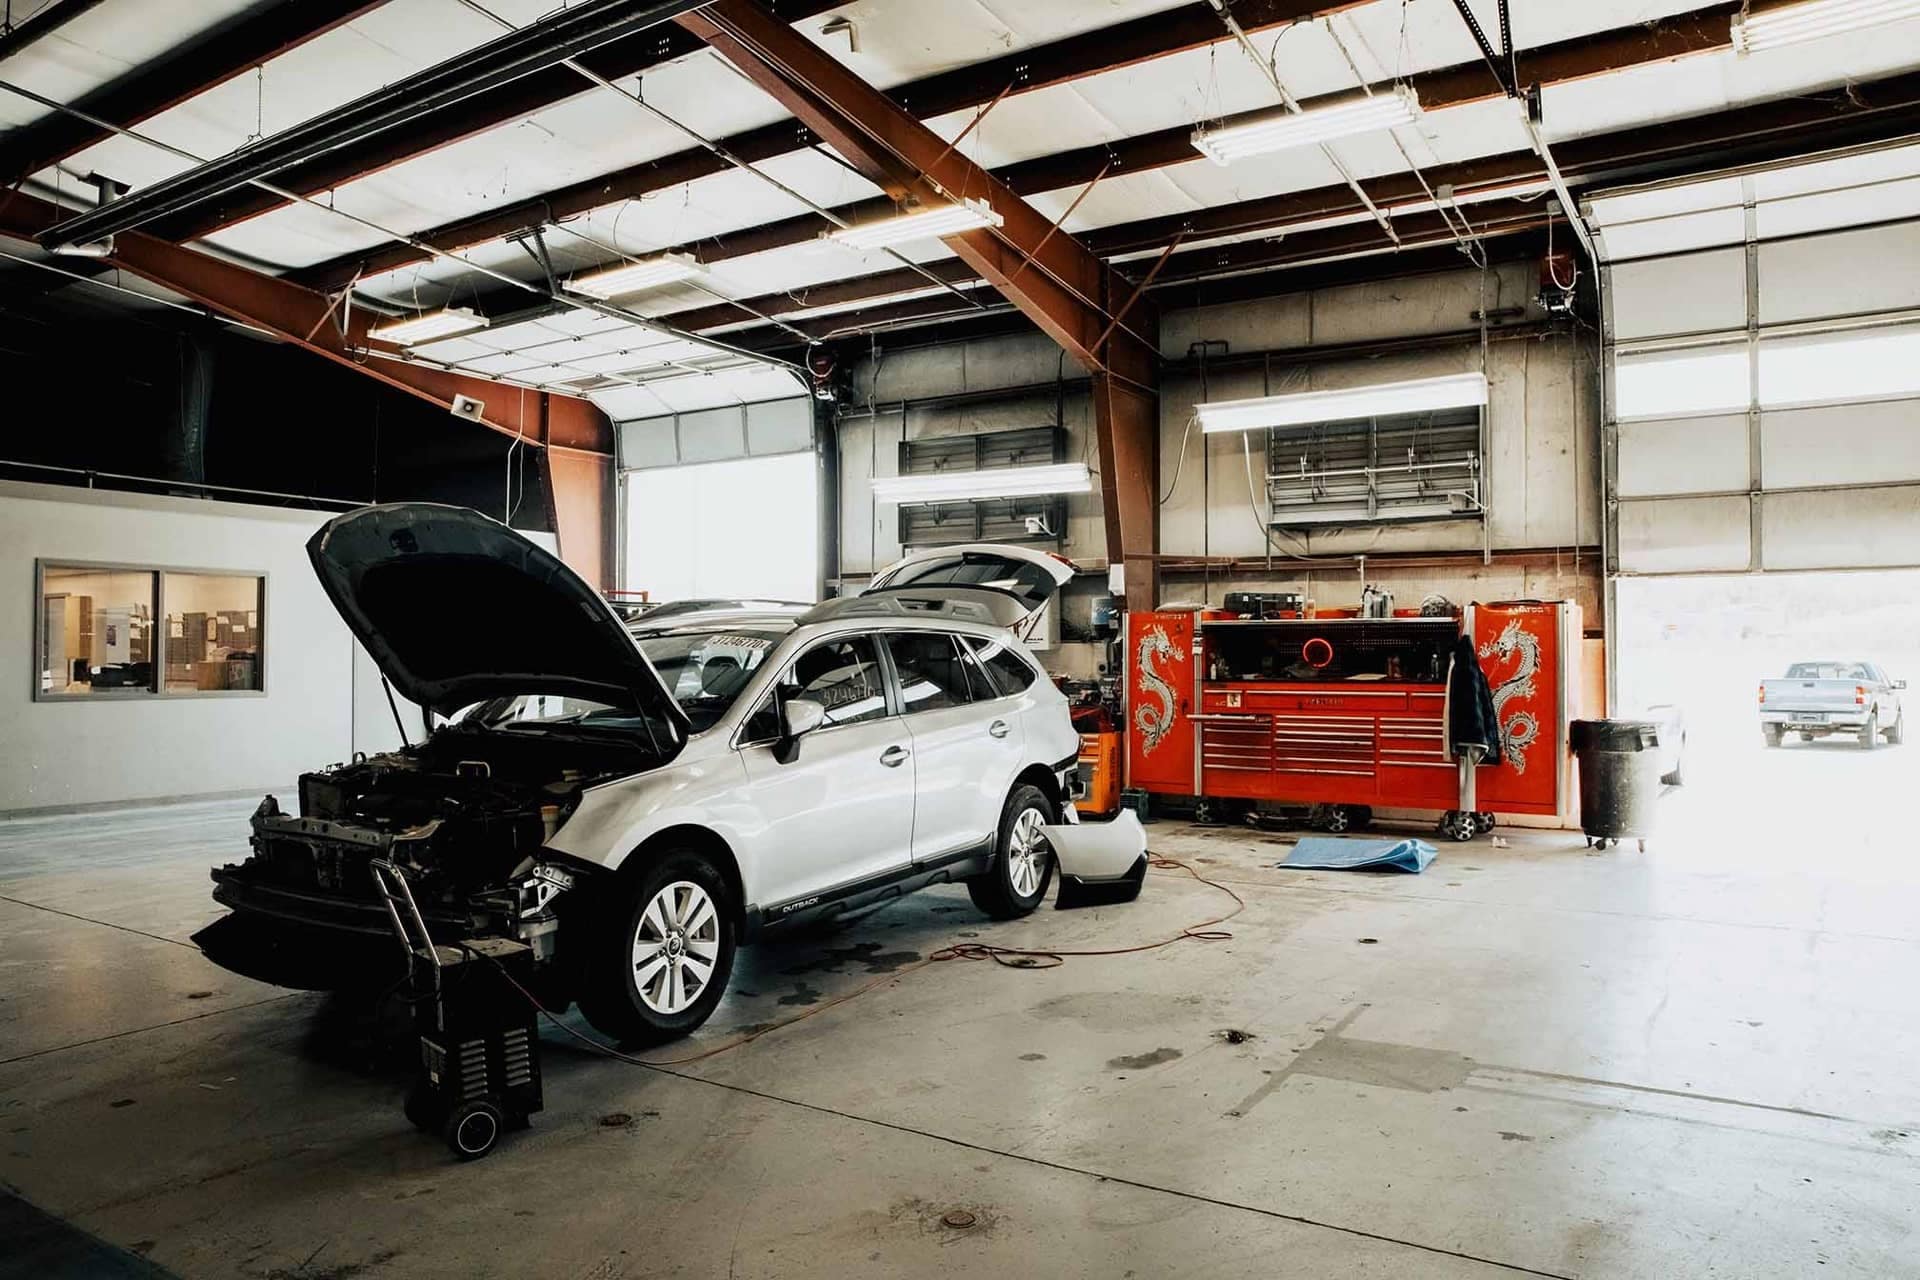 Vehicles being serviced